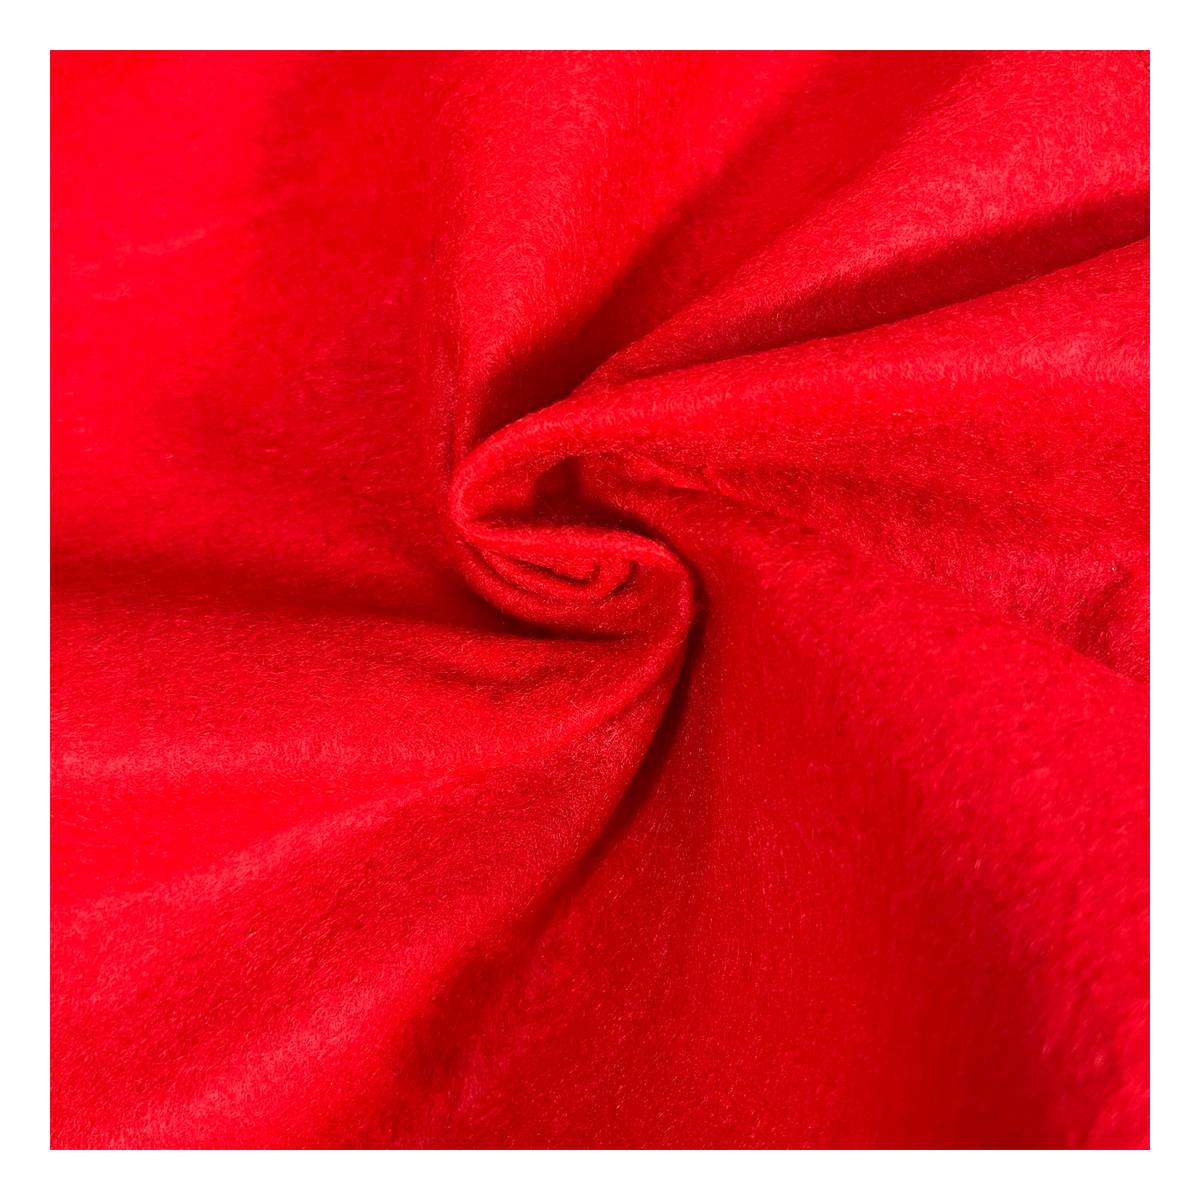 Plain Felt Fabric, Sold by the Metre